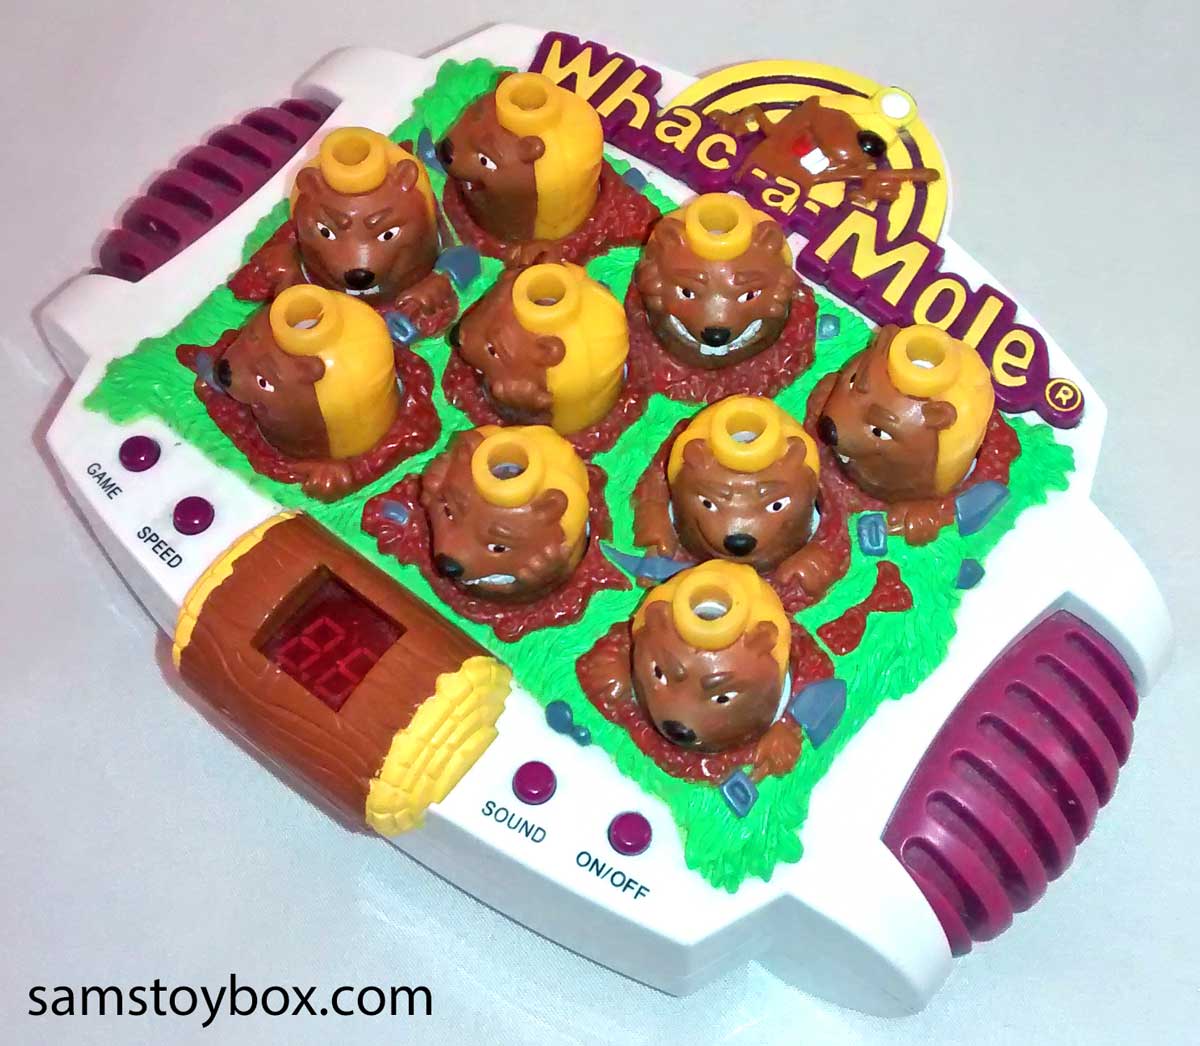 Whac-a-Mole Handheld Game by Marvel Entertainment